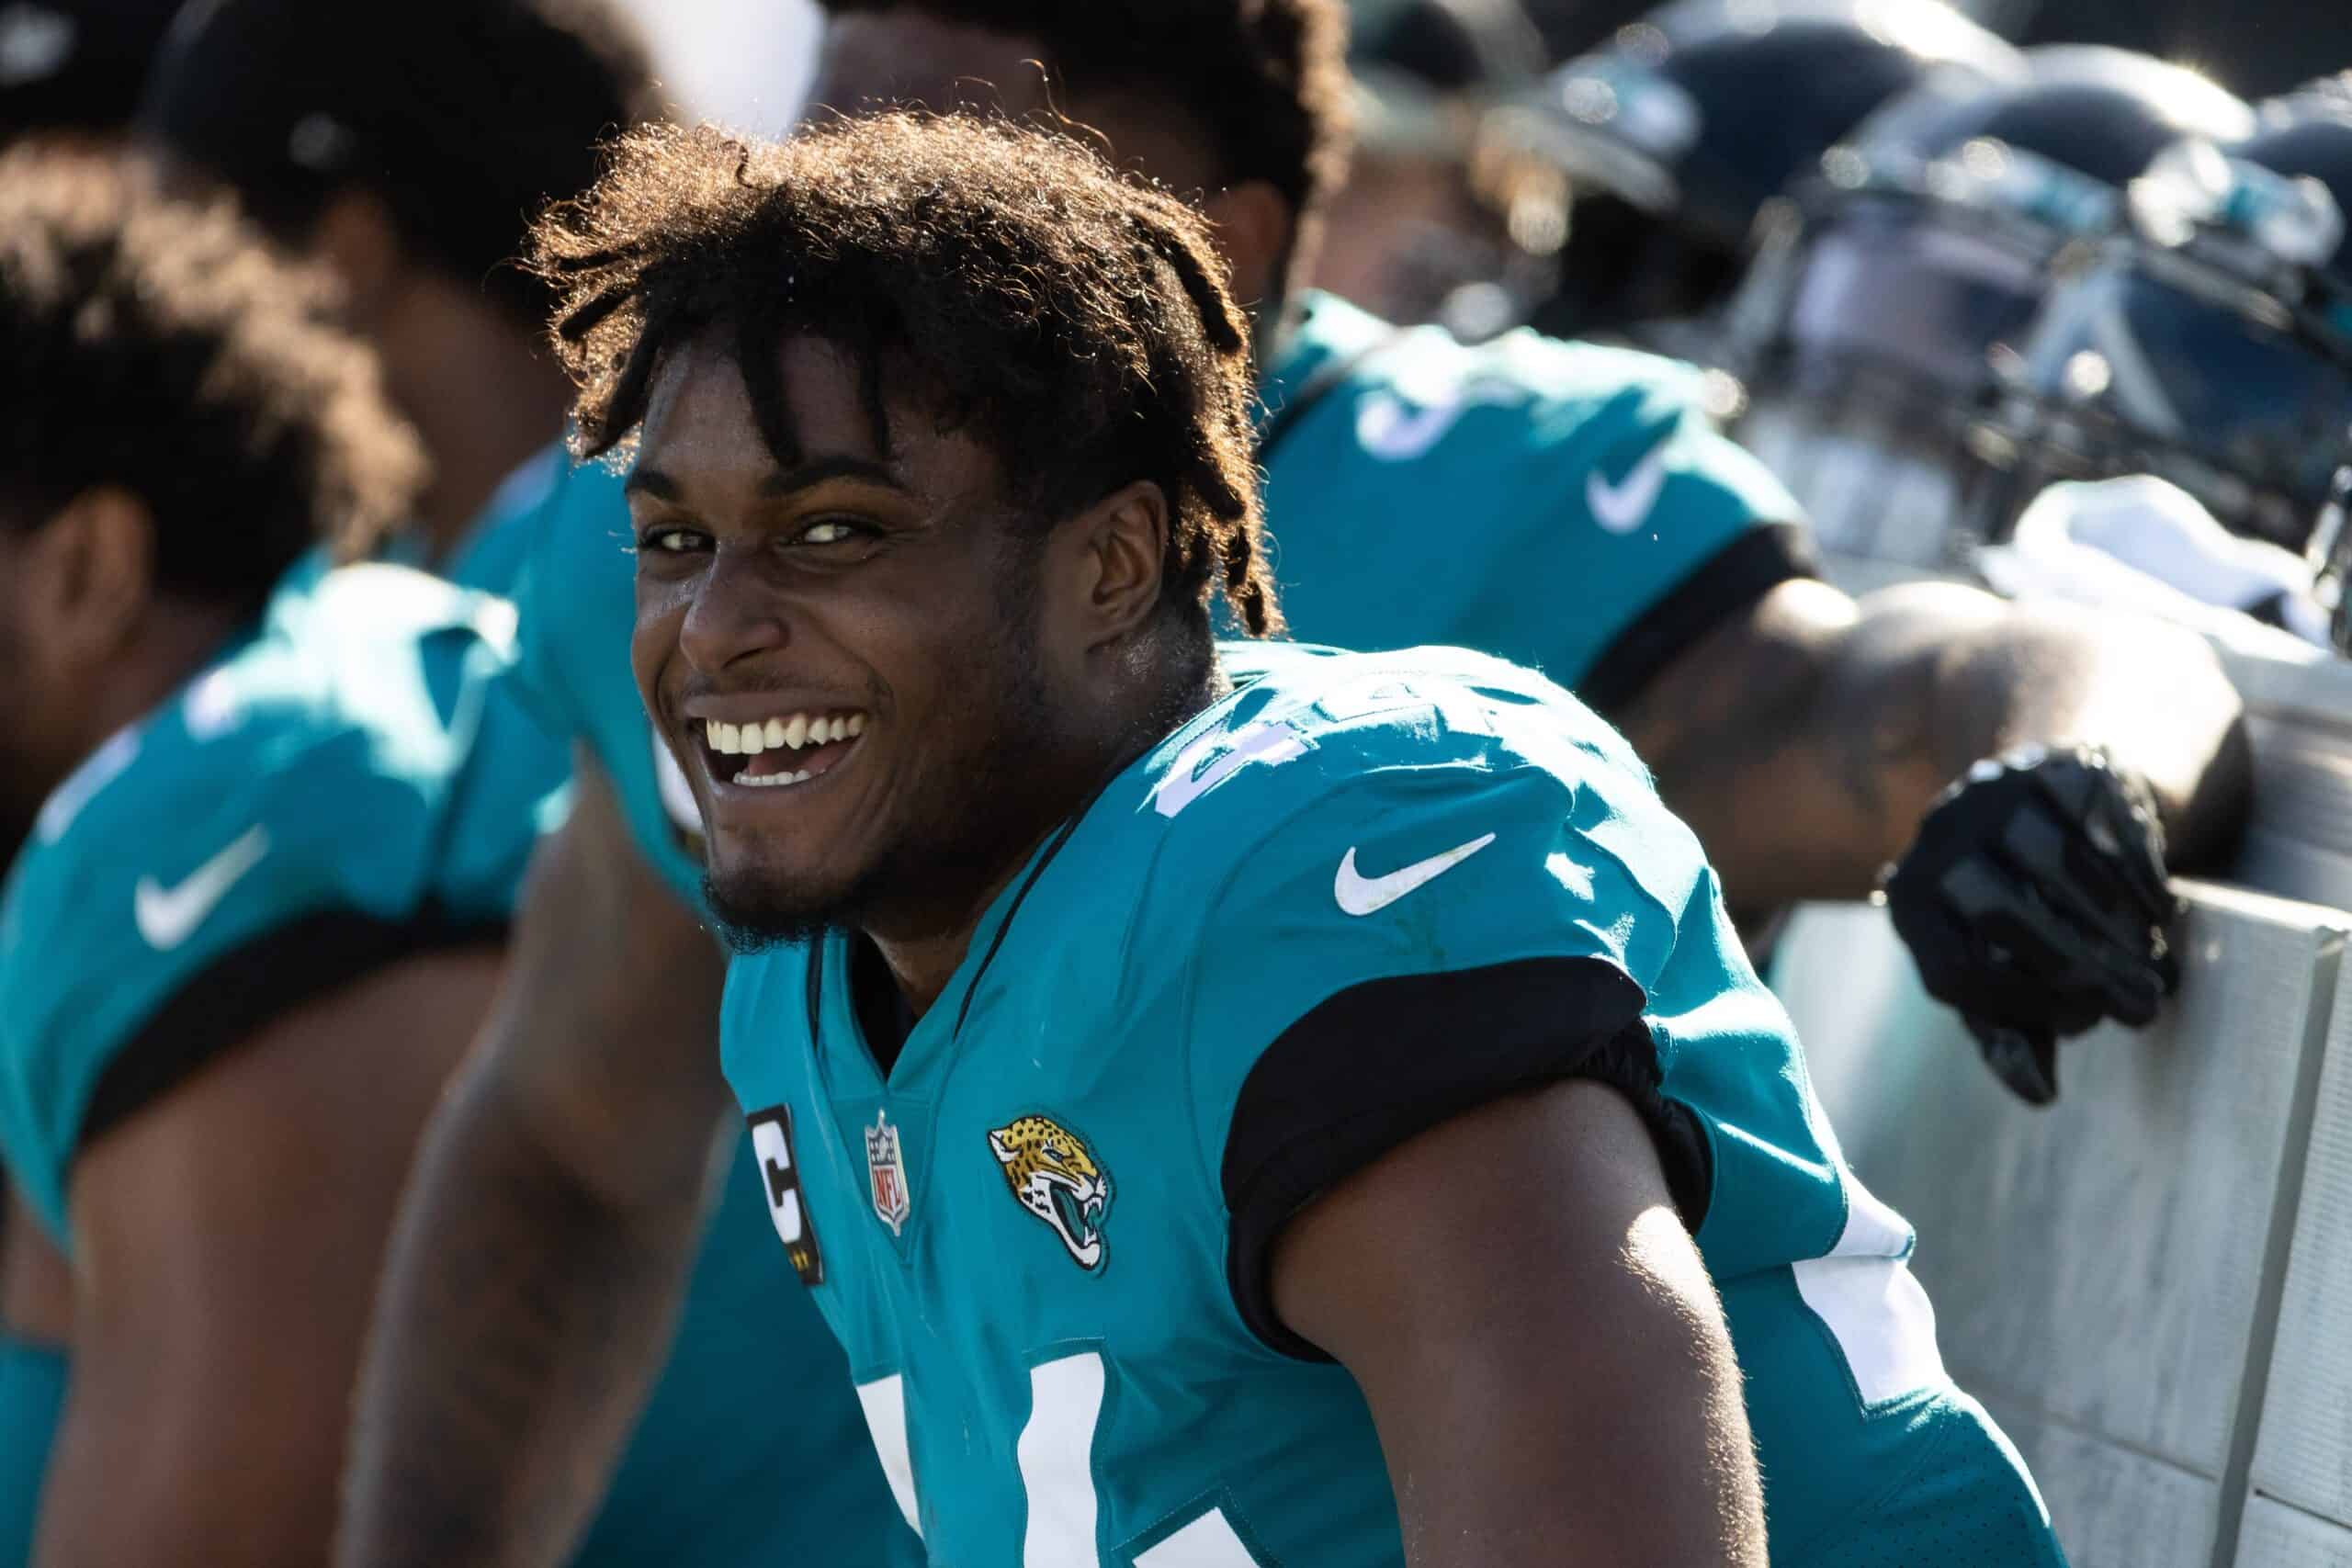 Myles Jack Free Agency Predictions: Landing spots include Cowboys,  Dolphins, Jets after surprise cut